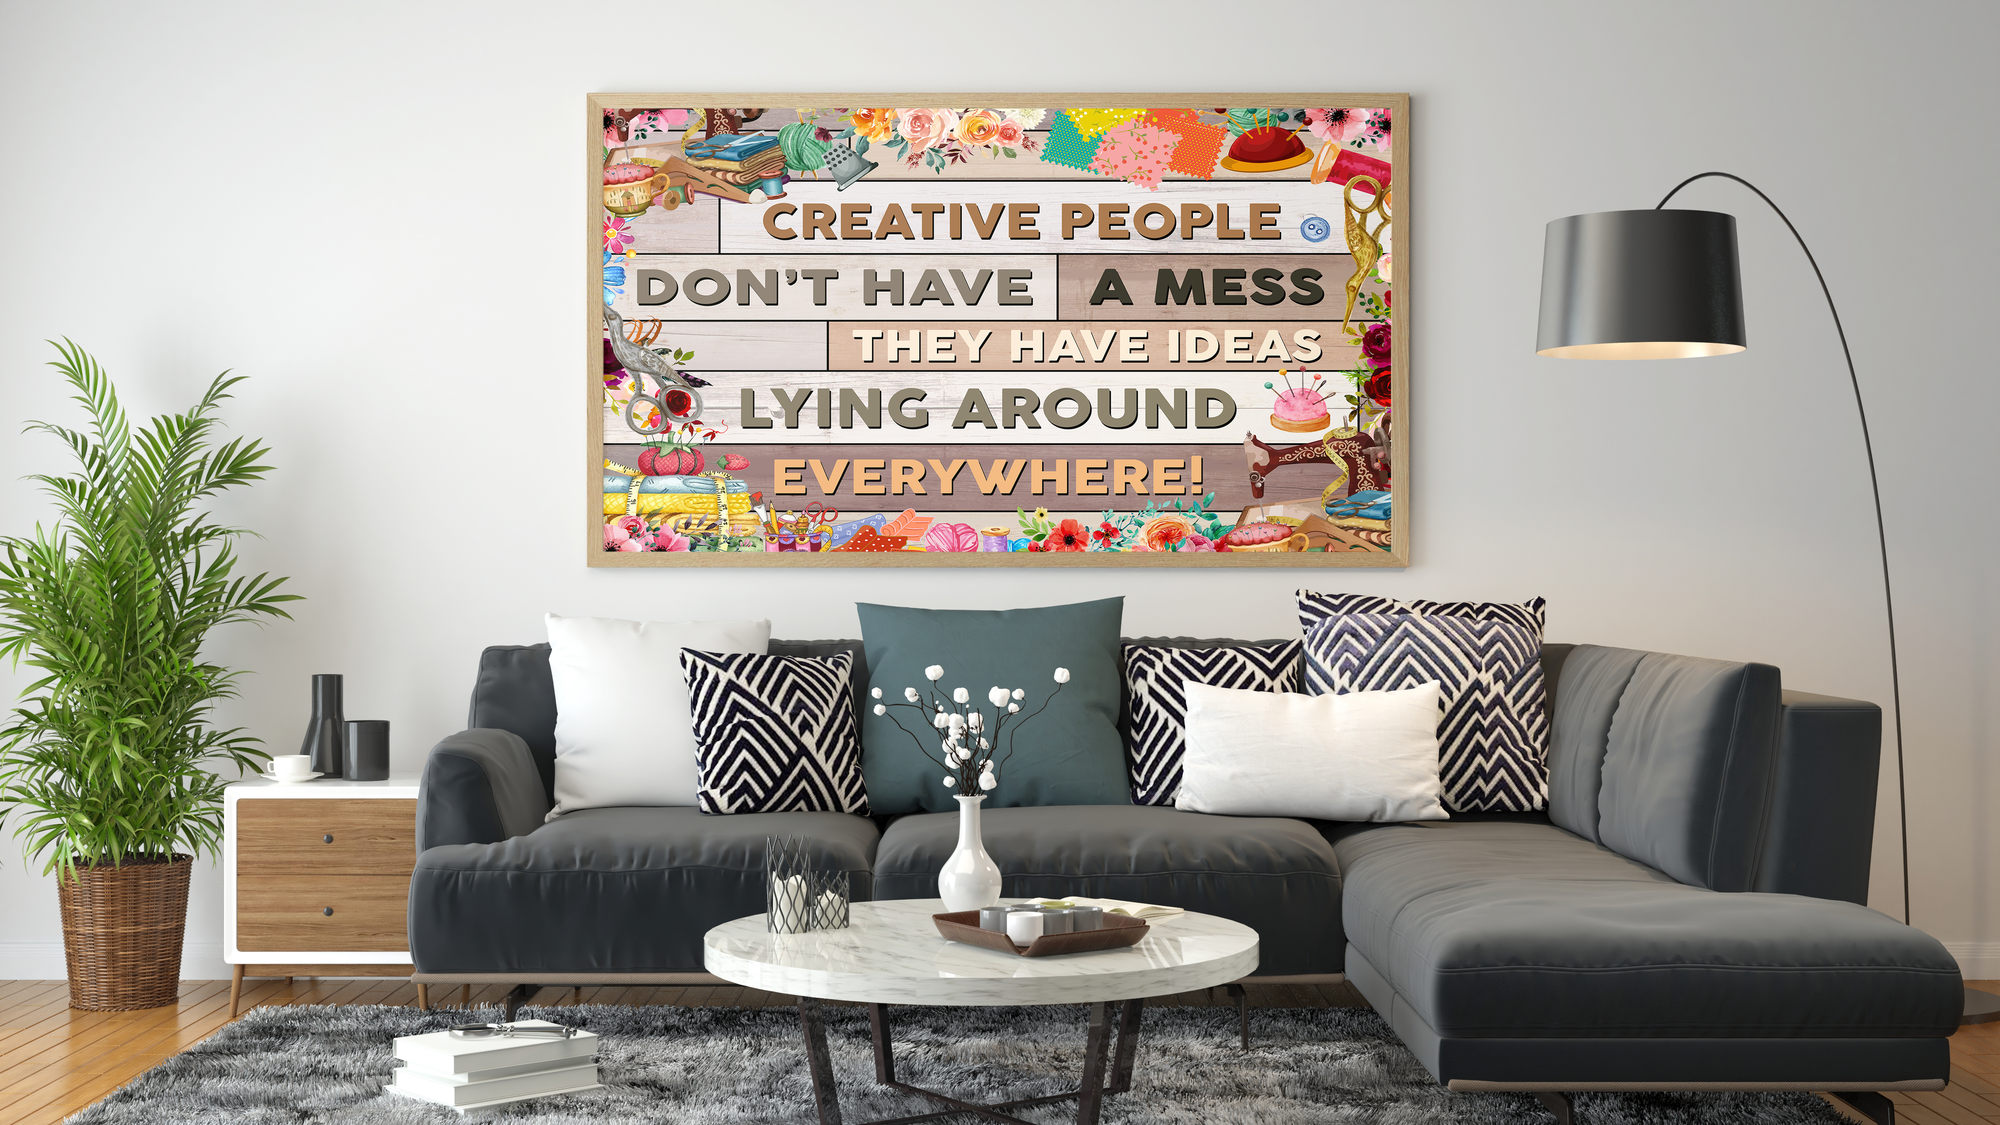 Creative People Don’t Have A Mess Crochet And Knitting Poster